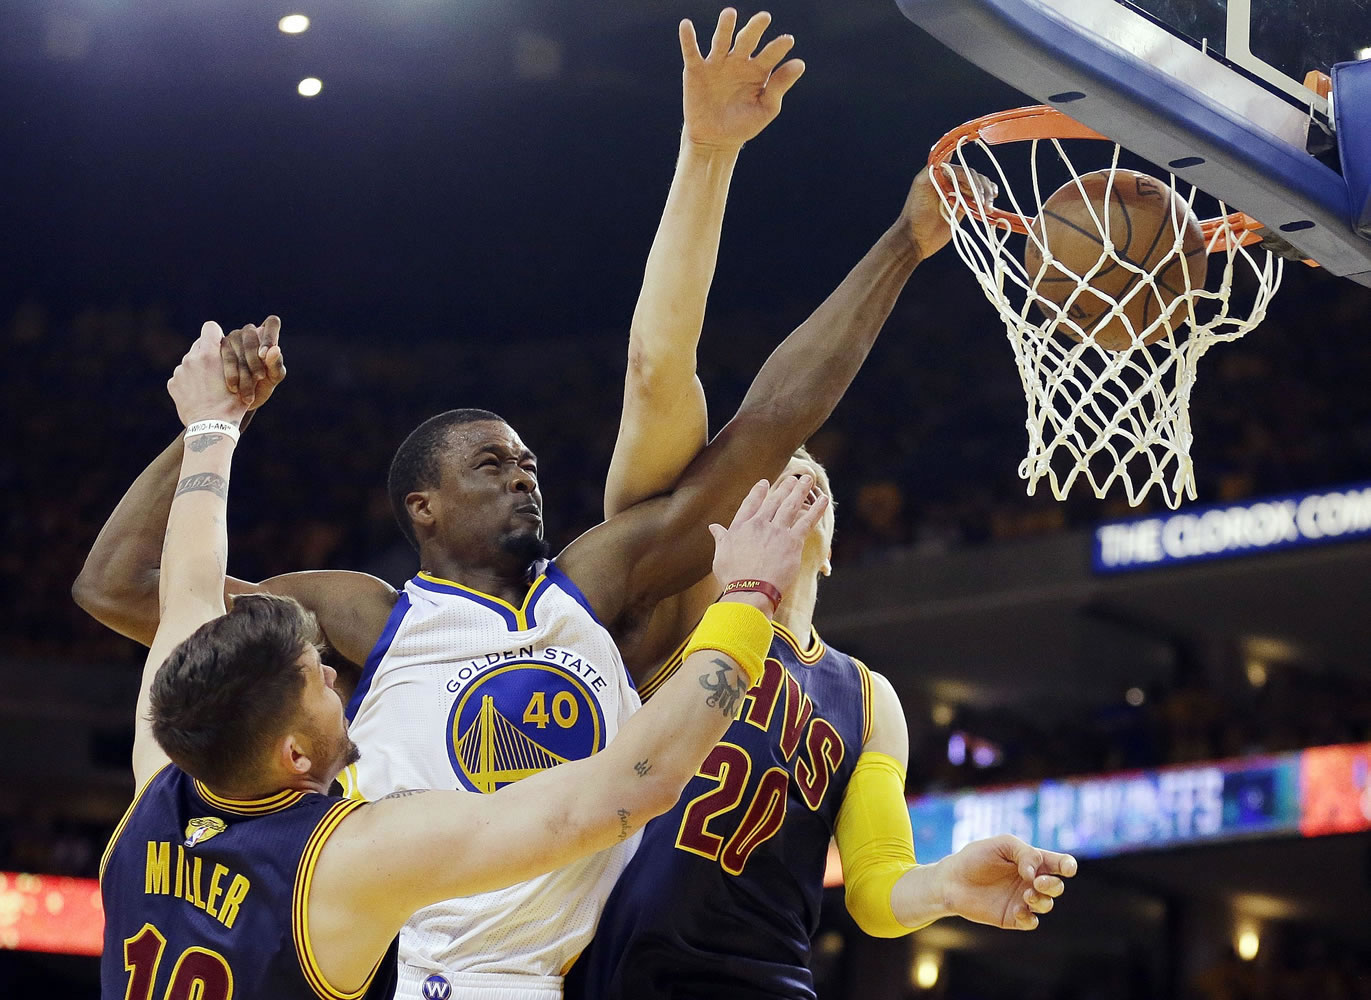 Golden State Warriors forward Harrison Barnes (40) dunks over Cleveland Cavaliers guard Mike Miller, left, and center Timofey Mozgov during the second half of Game 5 of the NBA Finals in Oakland, Calif., on Sunday, June 14, 2015.